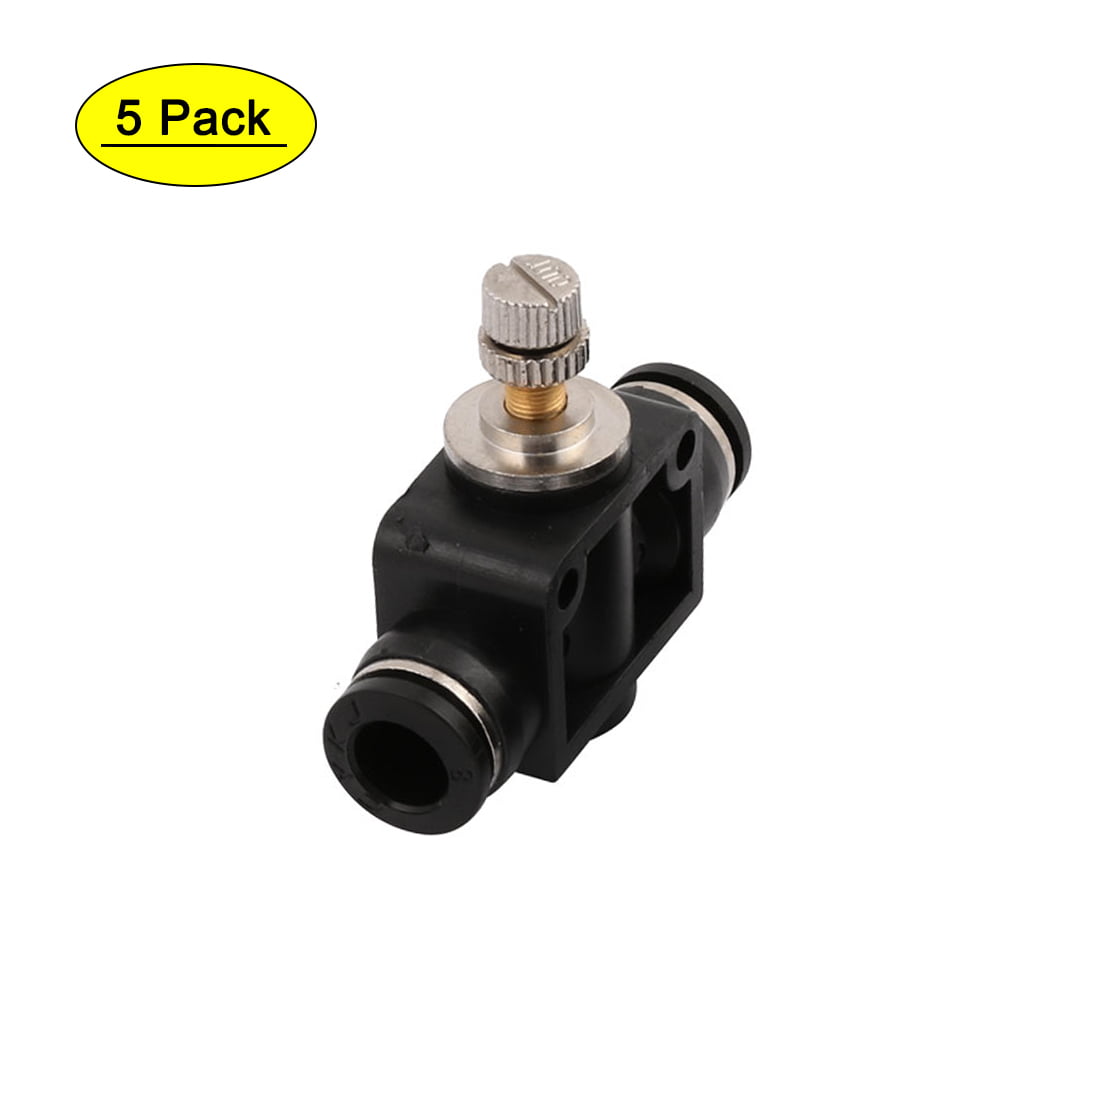 Liyafy 8mm Vent Tube Quick Connectors Push in Fitting Air Flow Pneumatic Speed Control Valve 5Pcs 